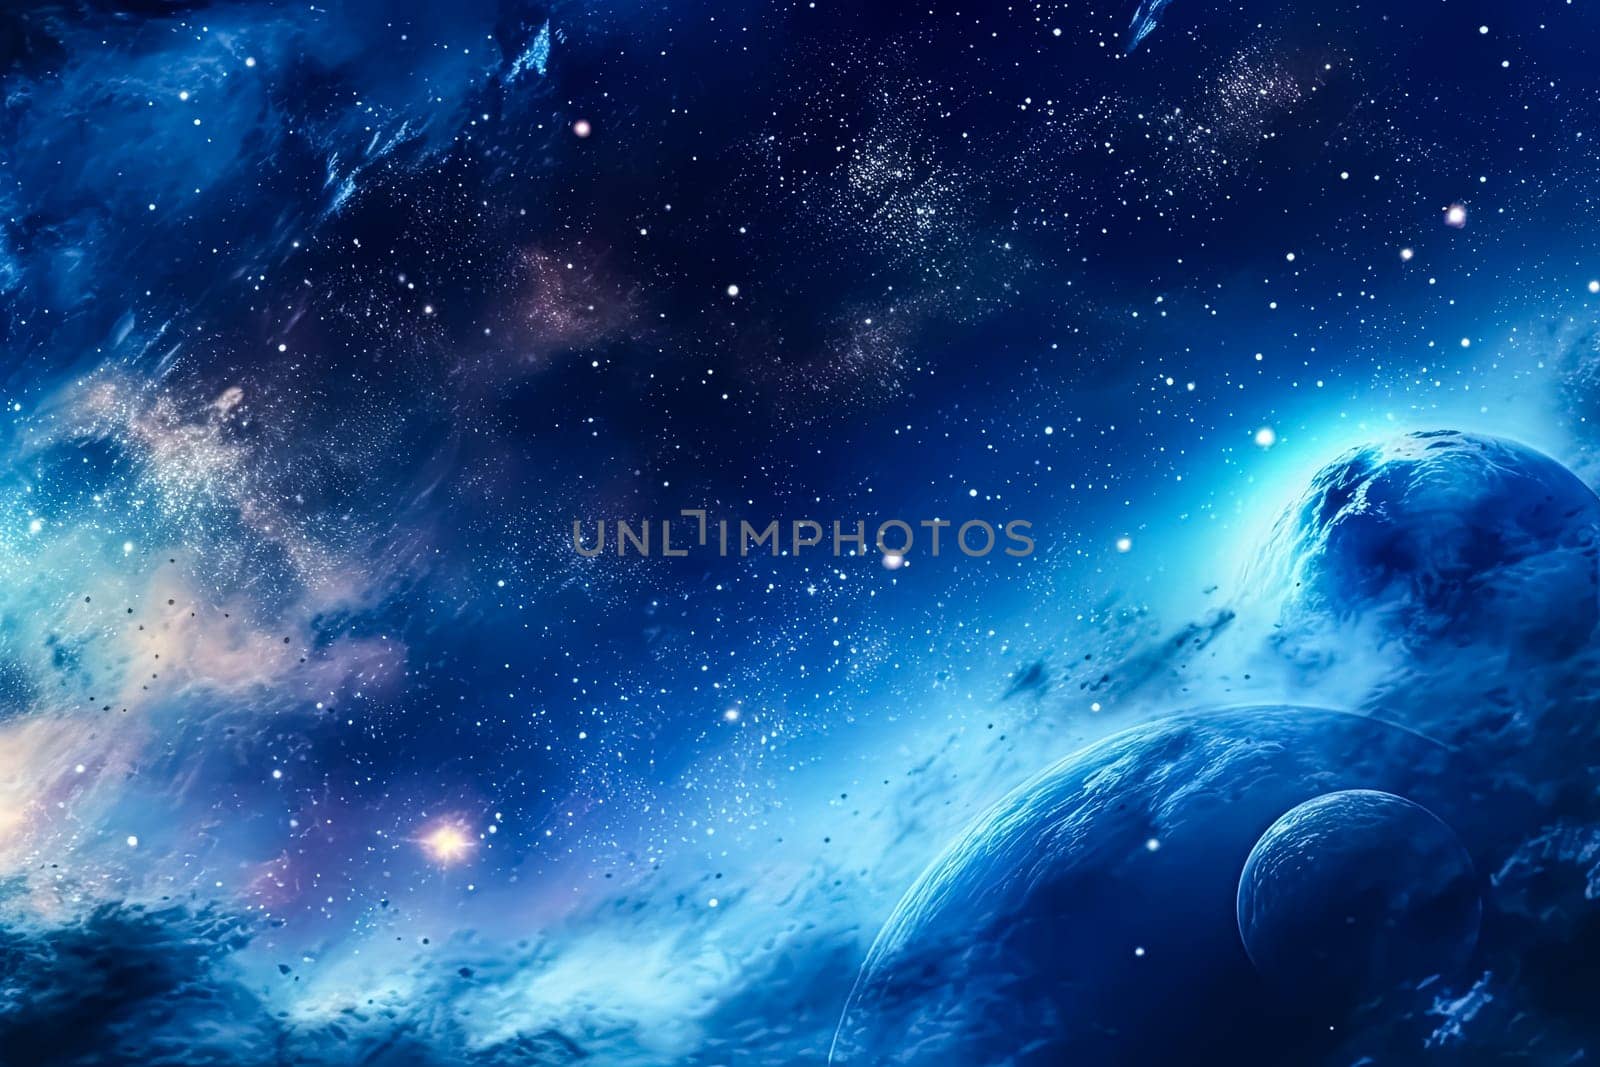 A blue and white space with two planets and a lot of rocks. The planets are in the middle of the image and the rocks are scattered around them. Scene is calm and peaceful, as the planets